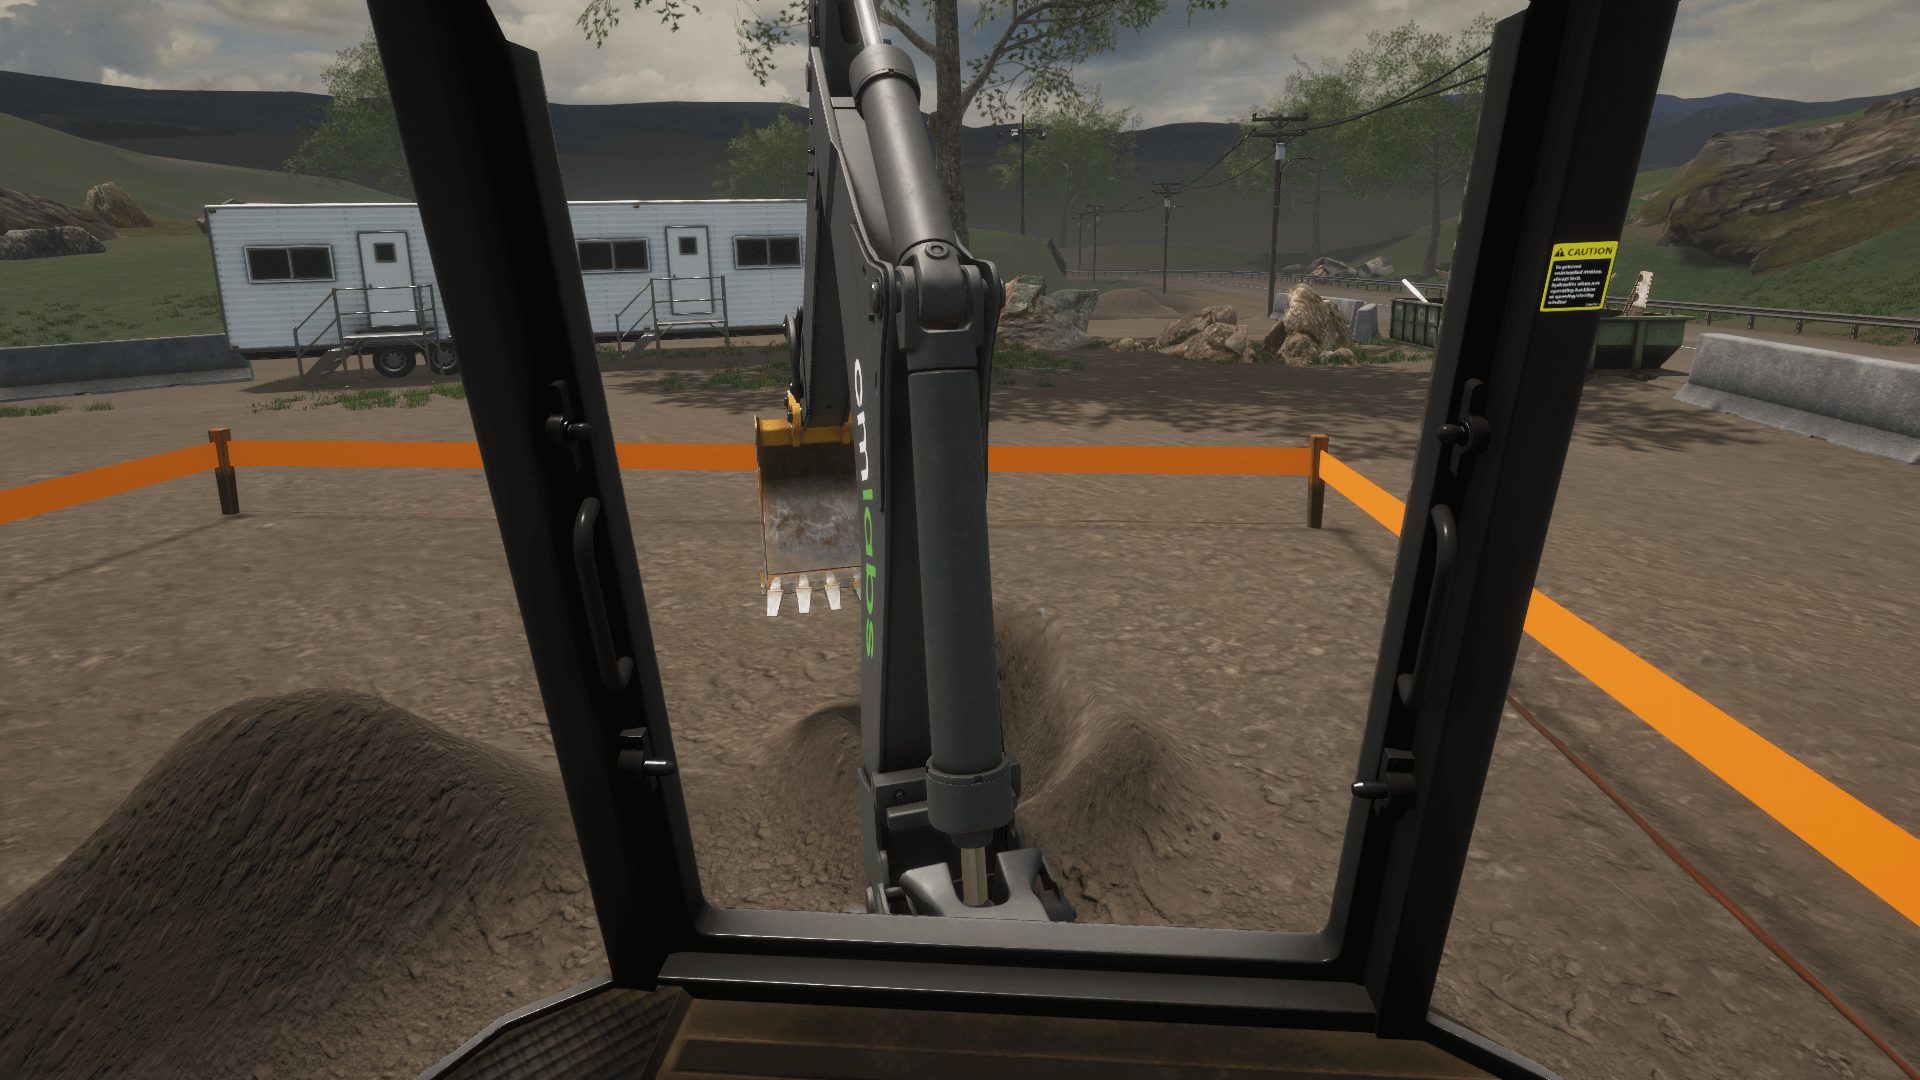 Backhoe simulator training - Cabin point of view